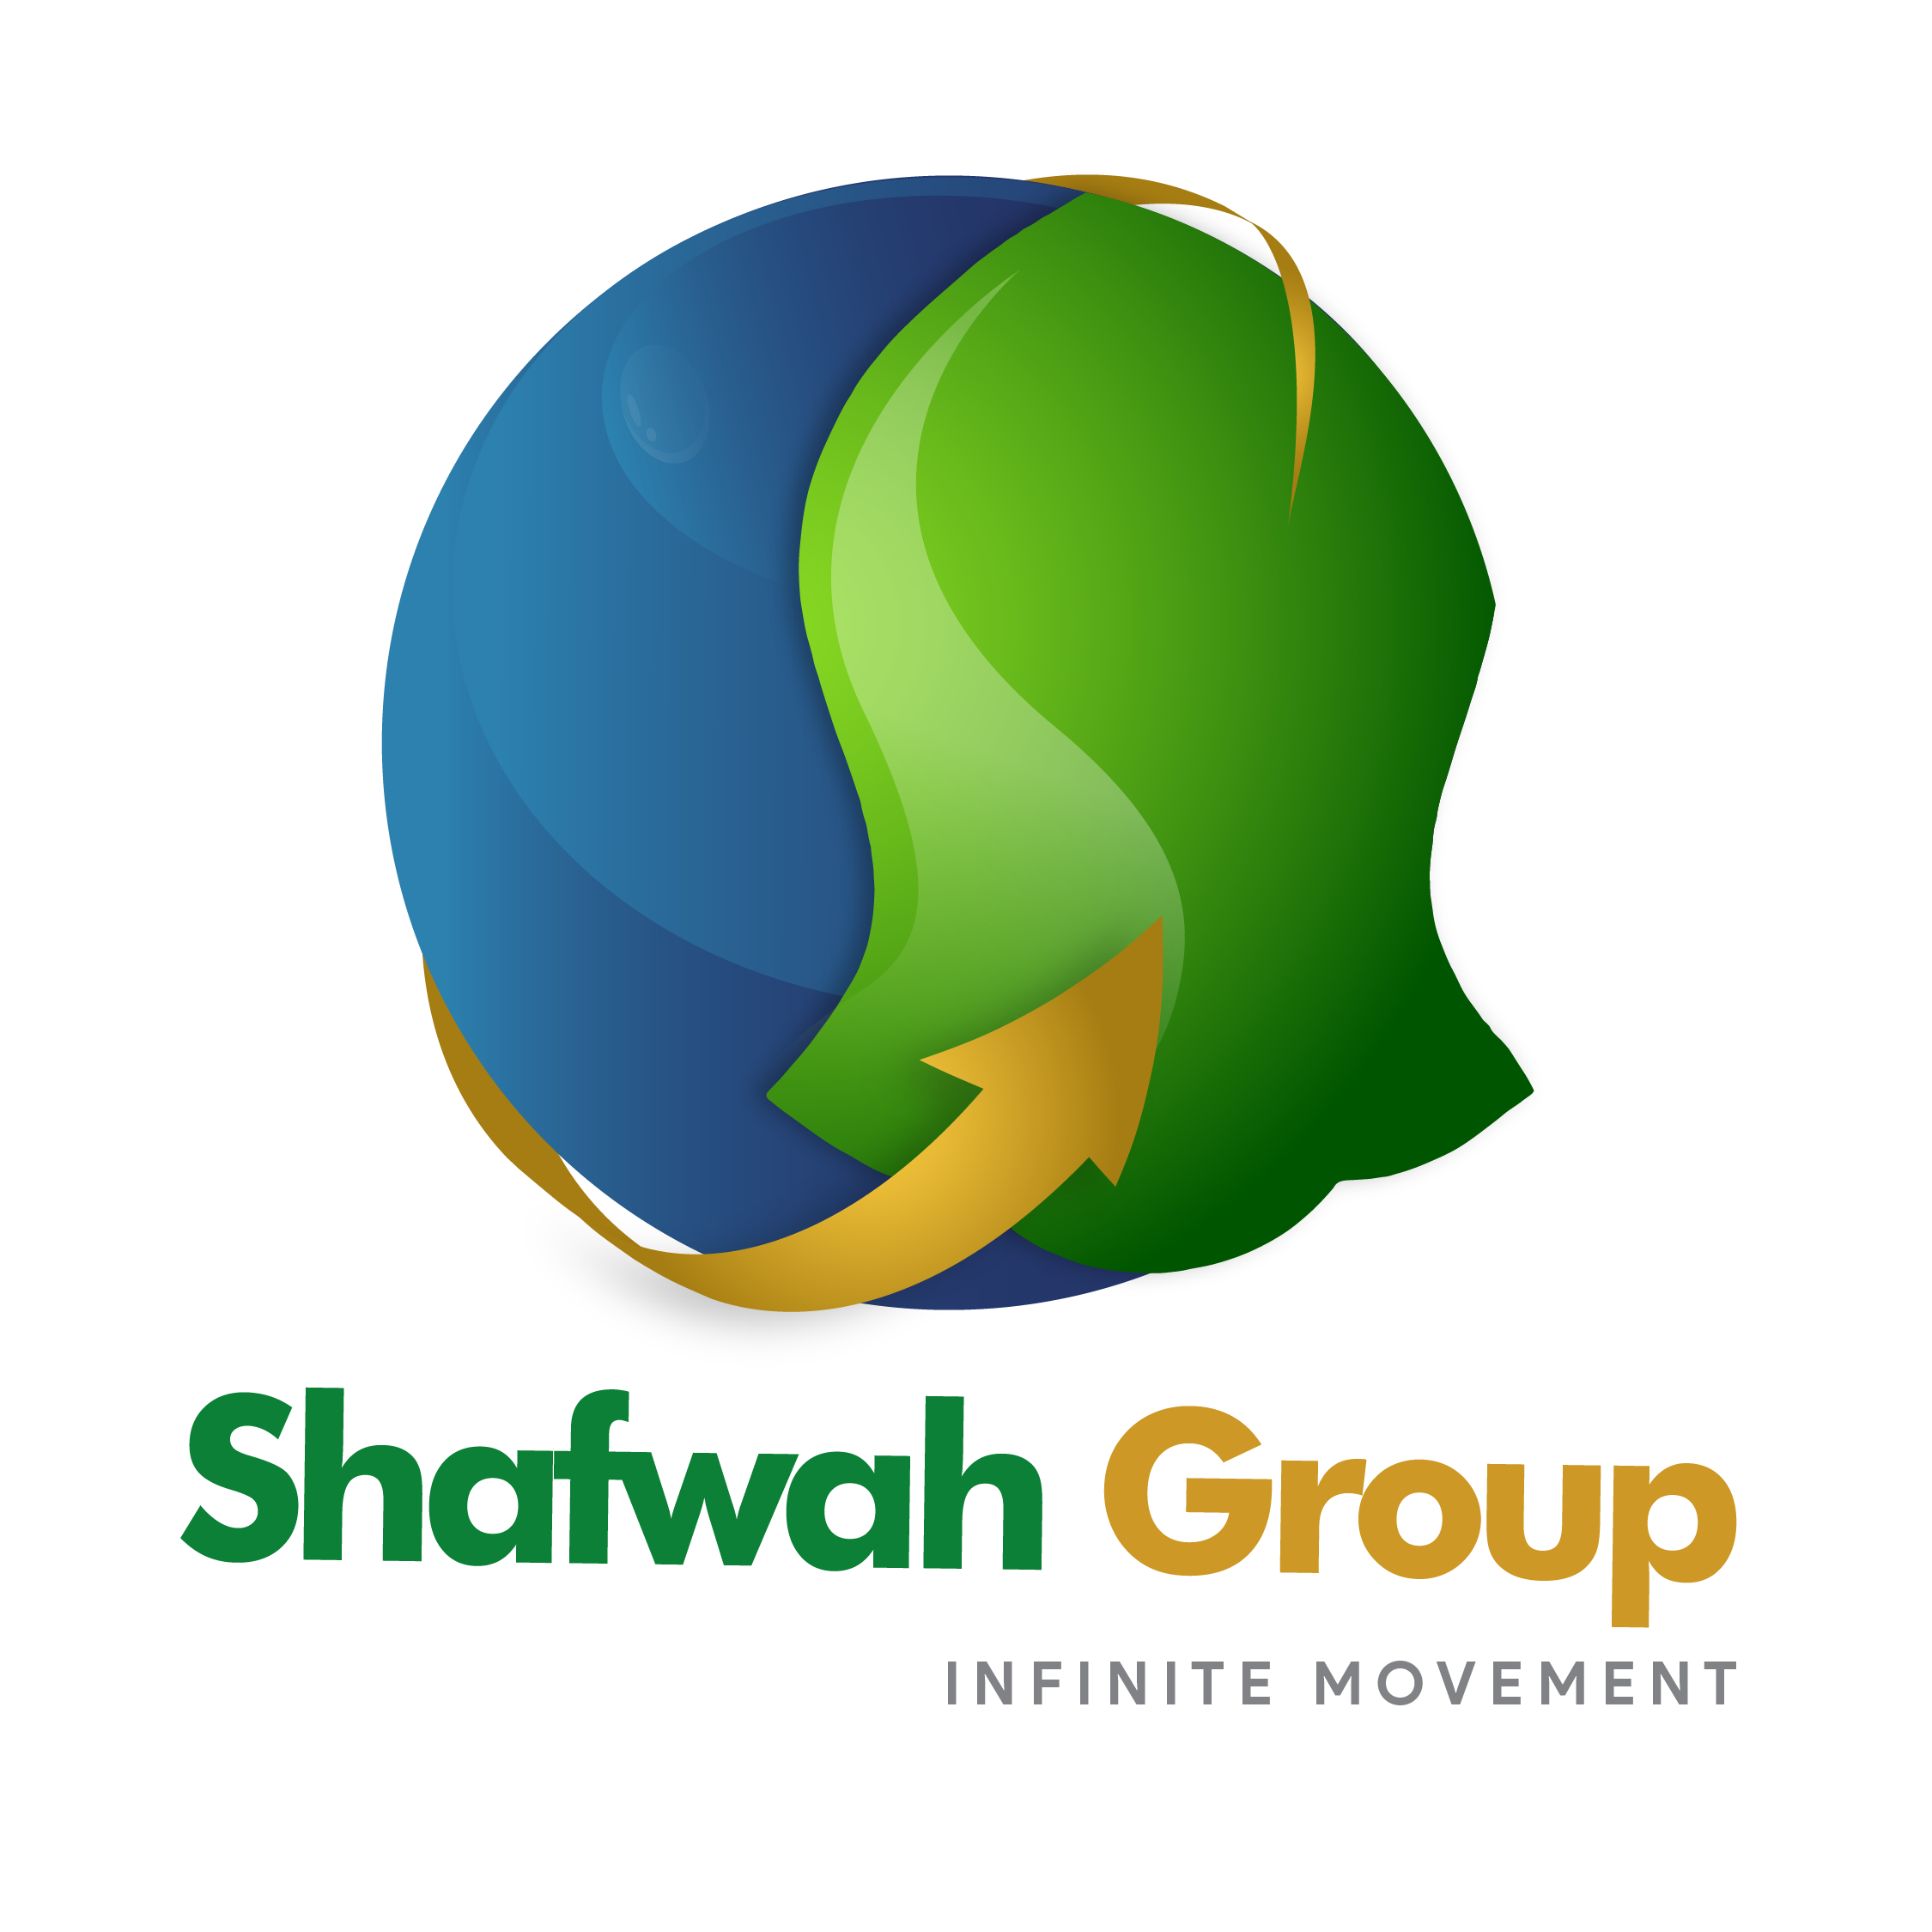 Shafwah Group